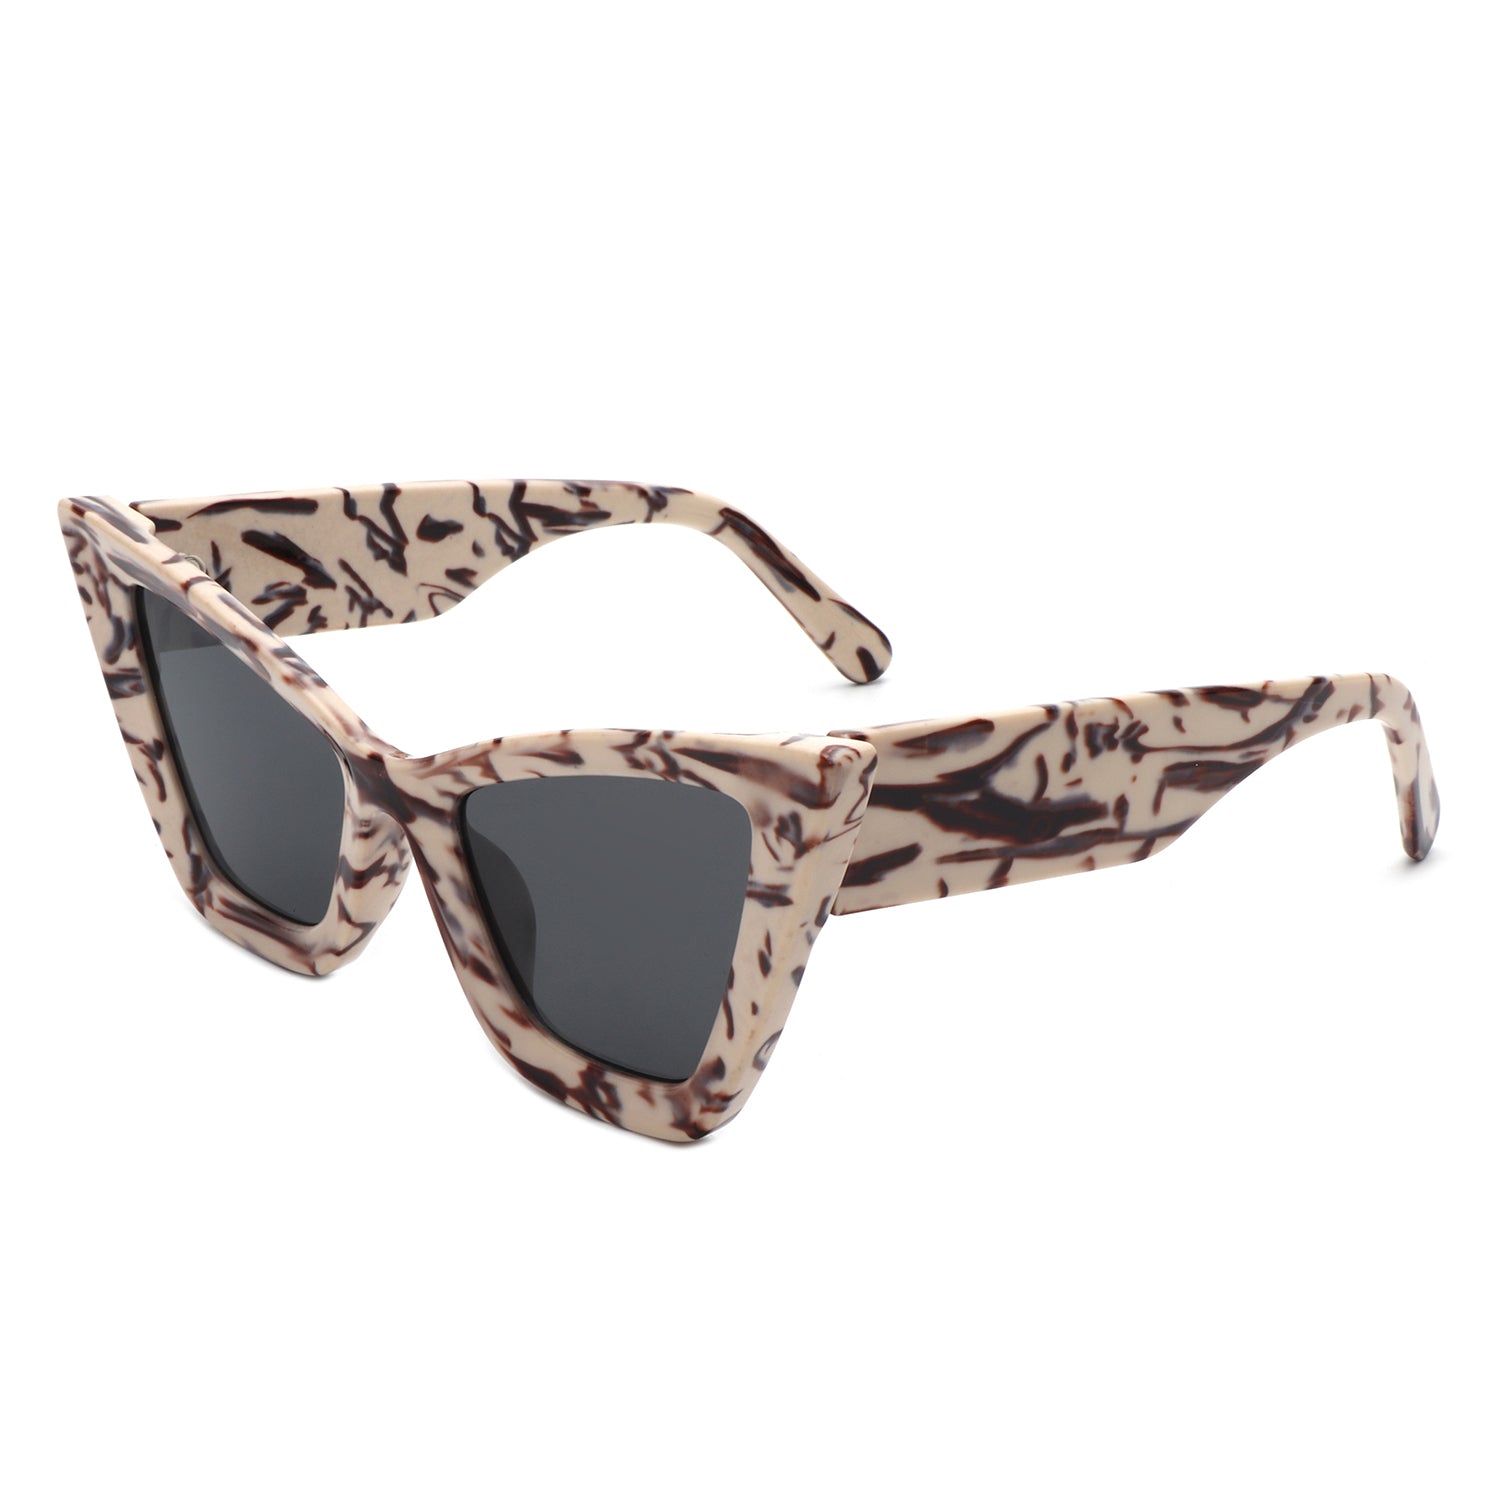 HS1206-1 - Square Retro Fashion High Pointed Cat Eye Wholesale Sunglasses